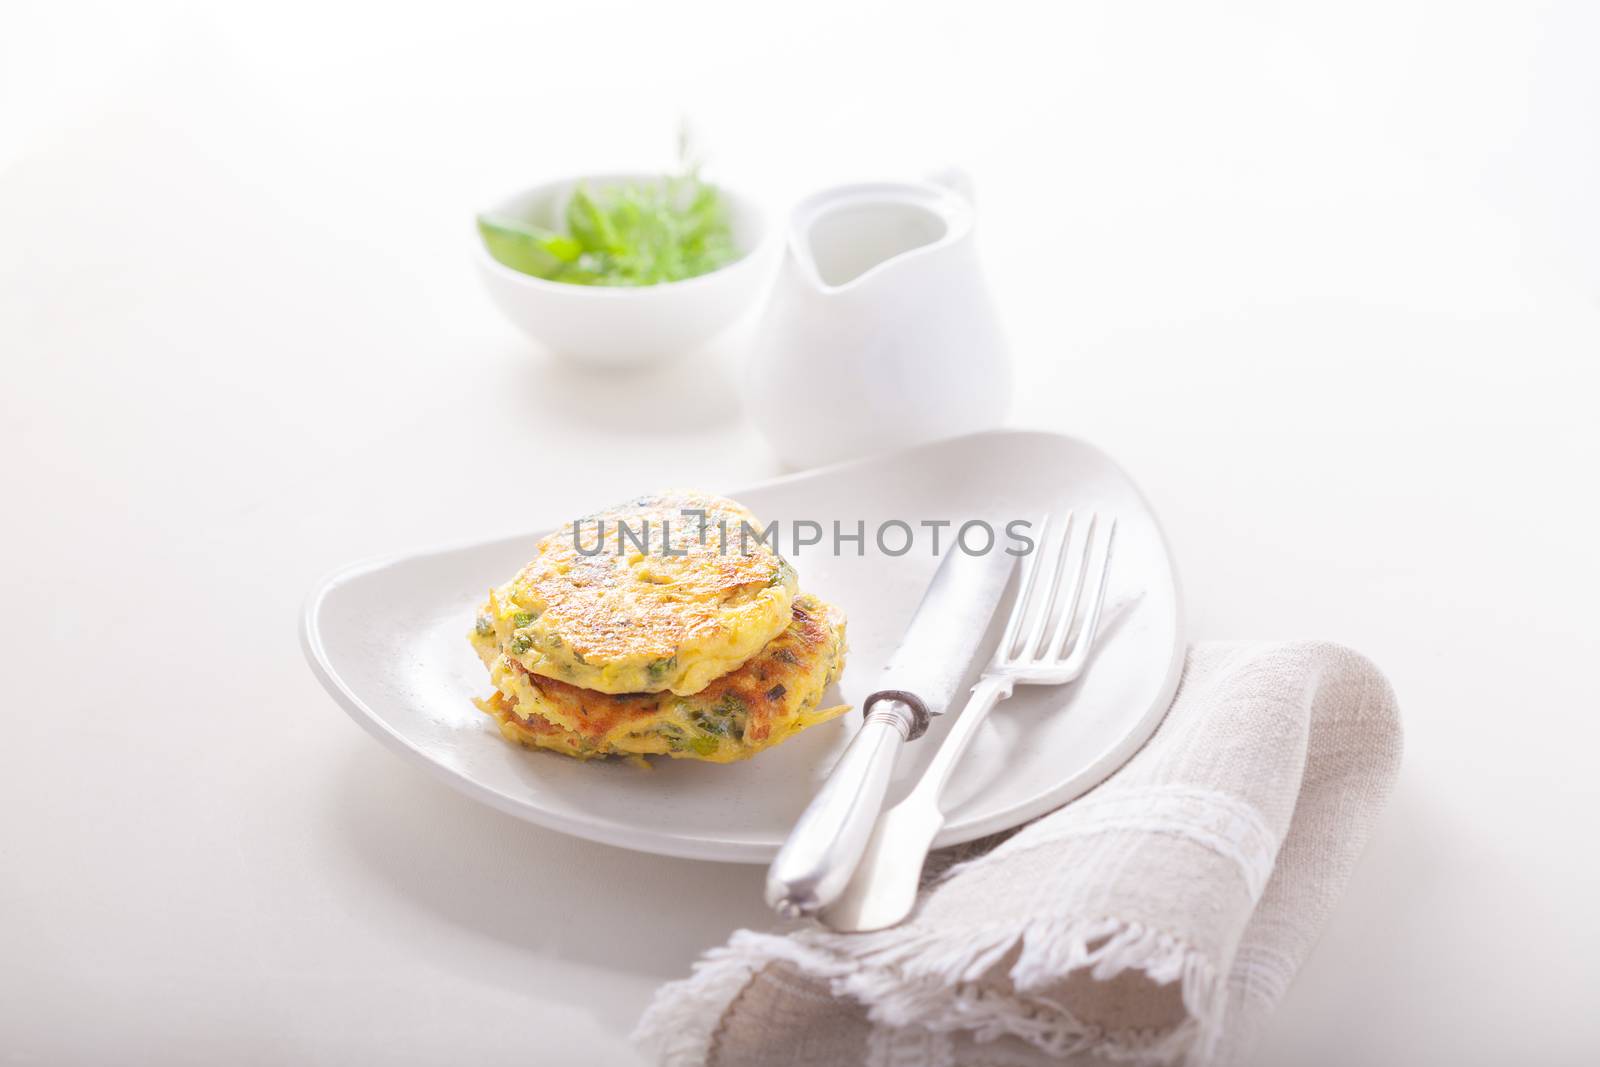 Healthy vegetarian zucchini fritters served on the table